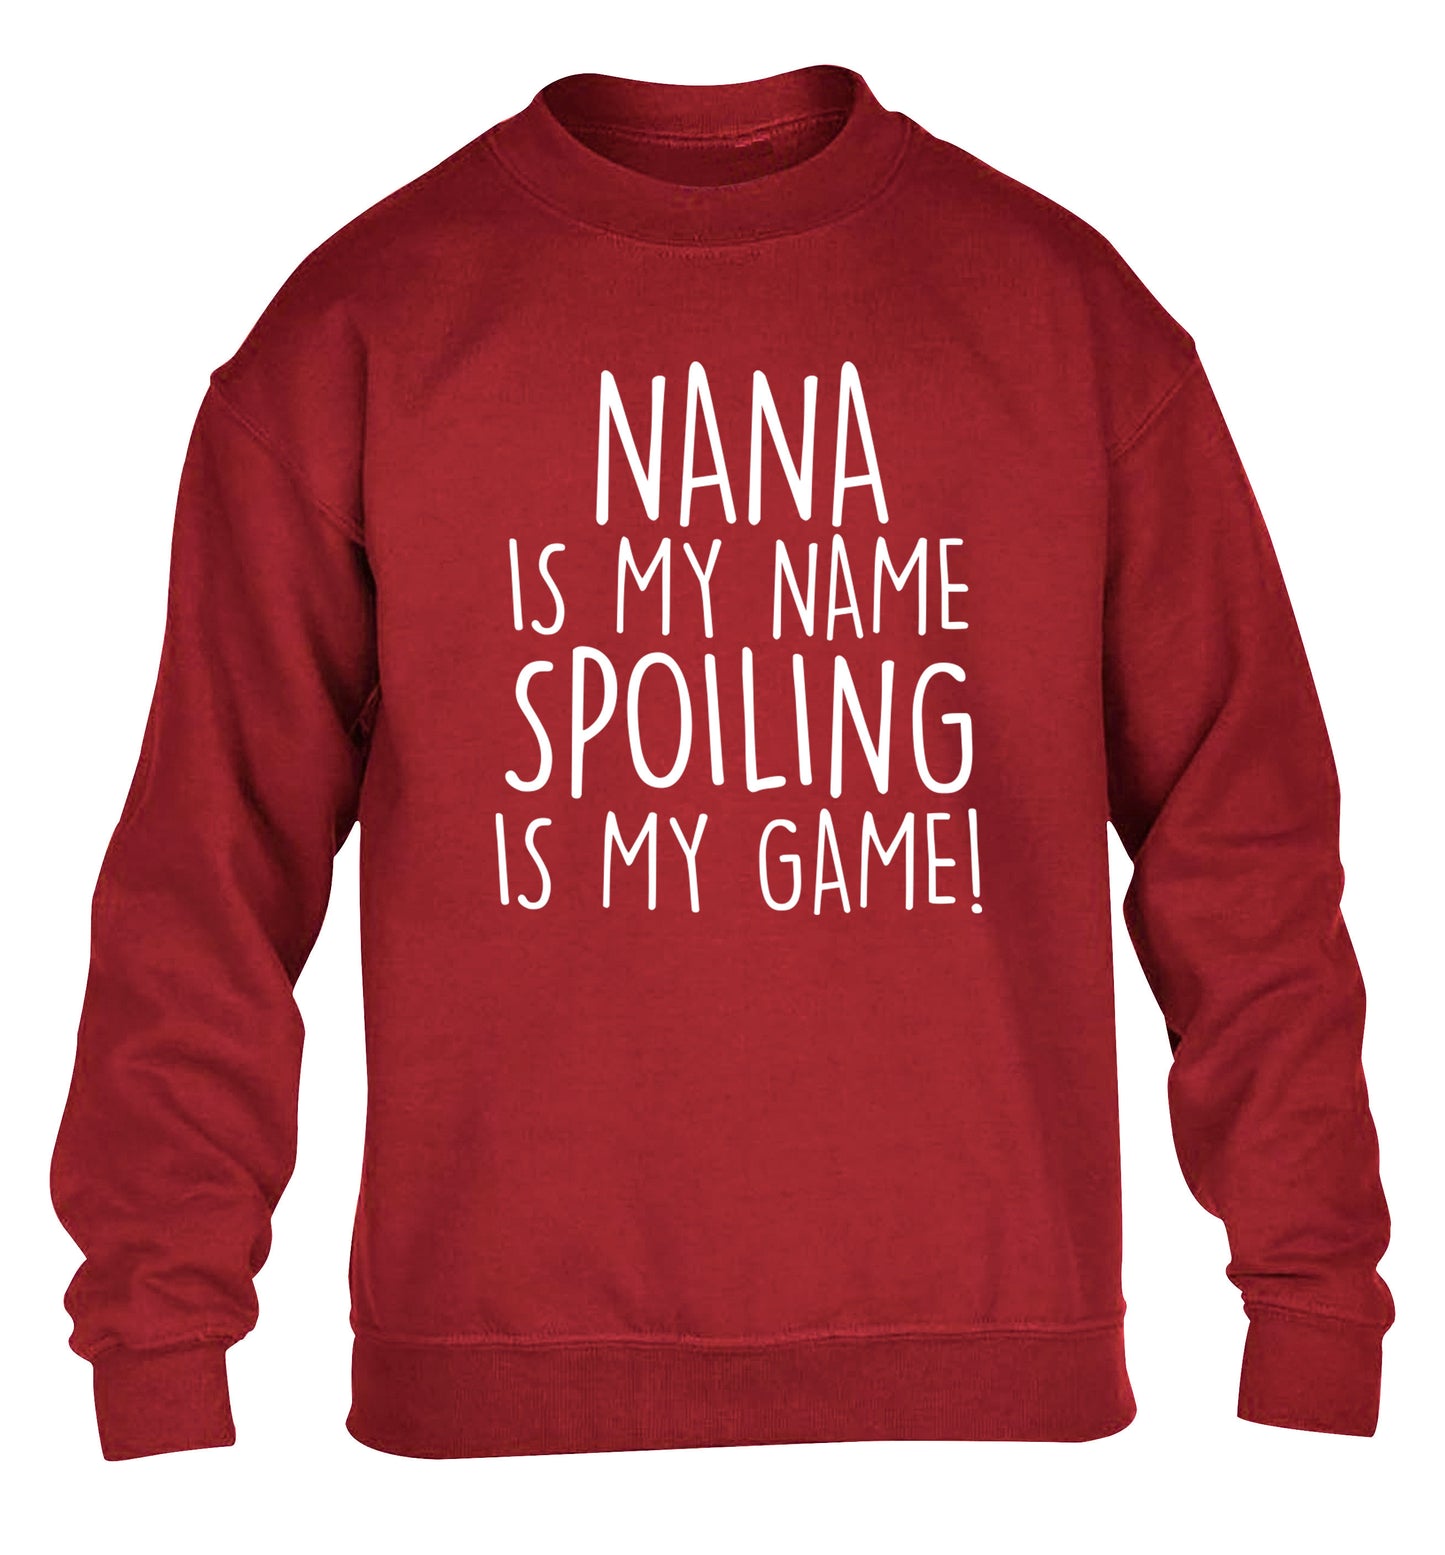 Nana is my name, spoiling is my game children's grey sweater 12-14 Years